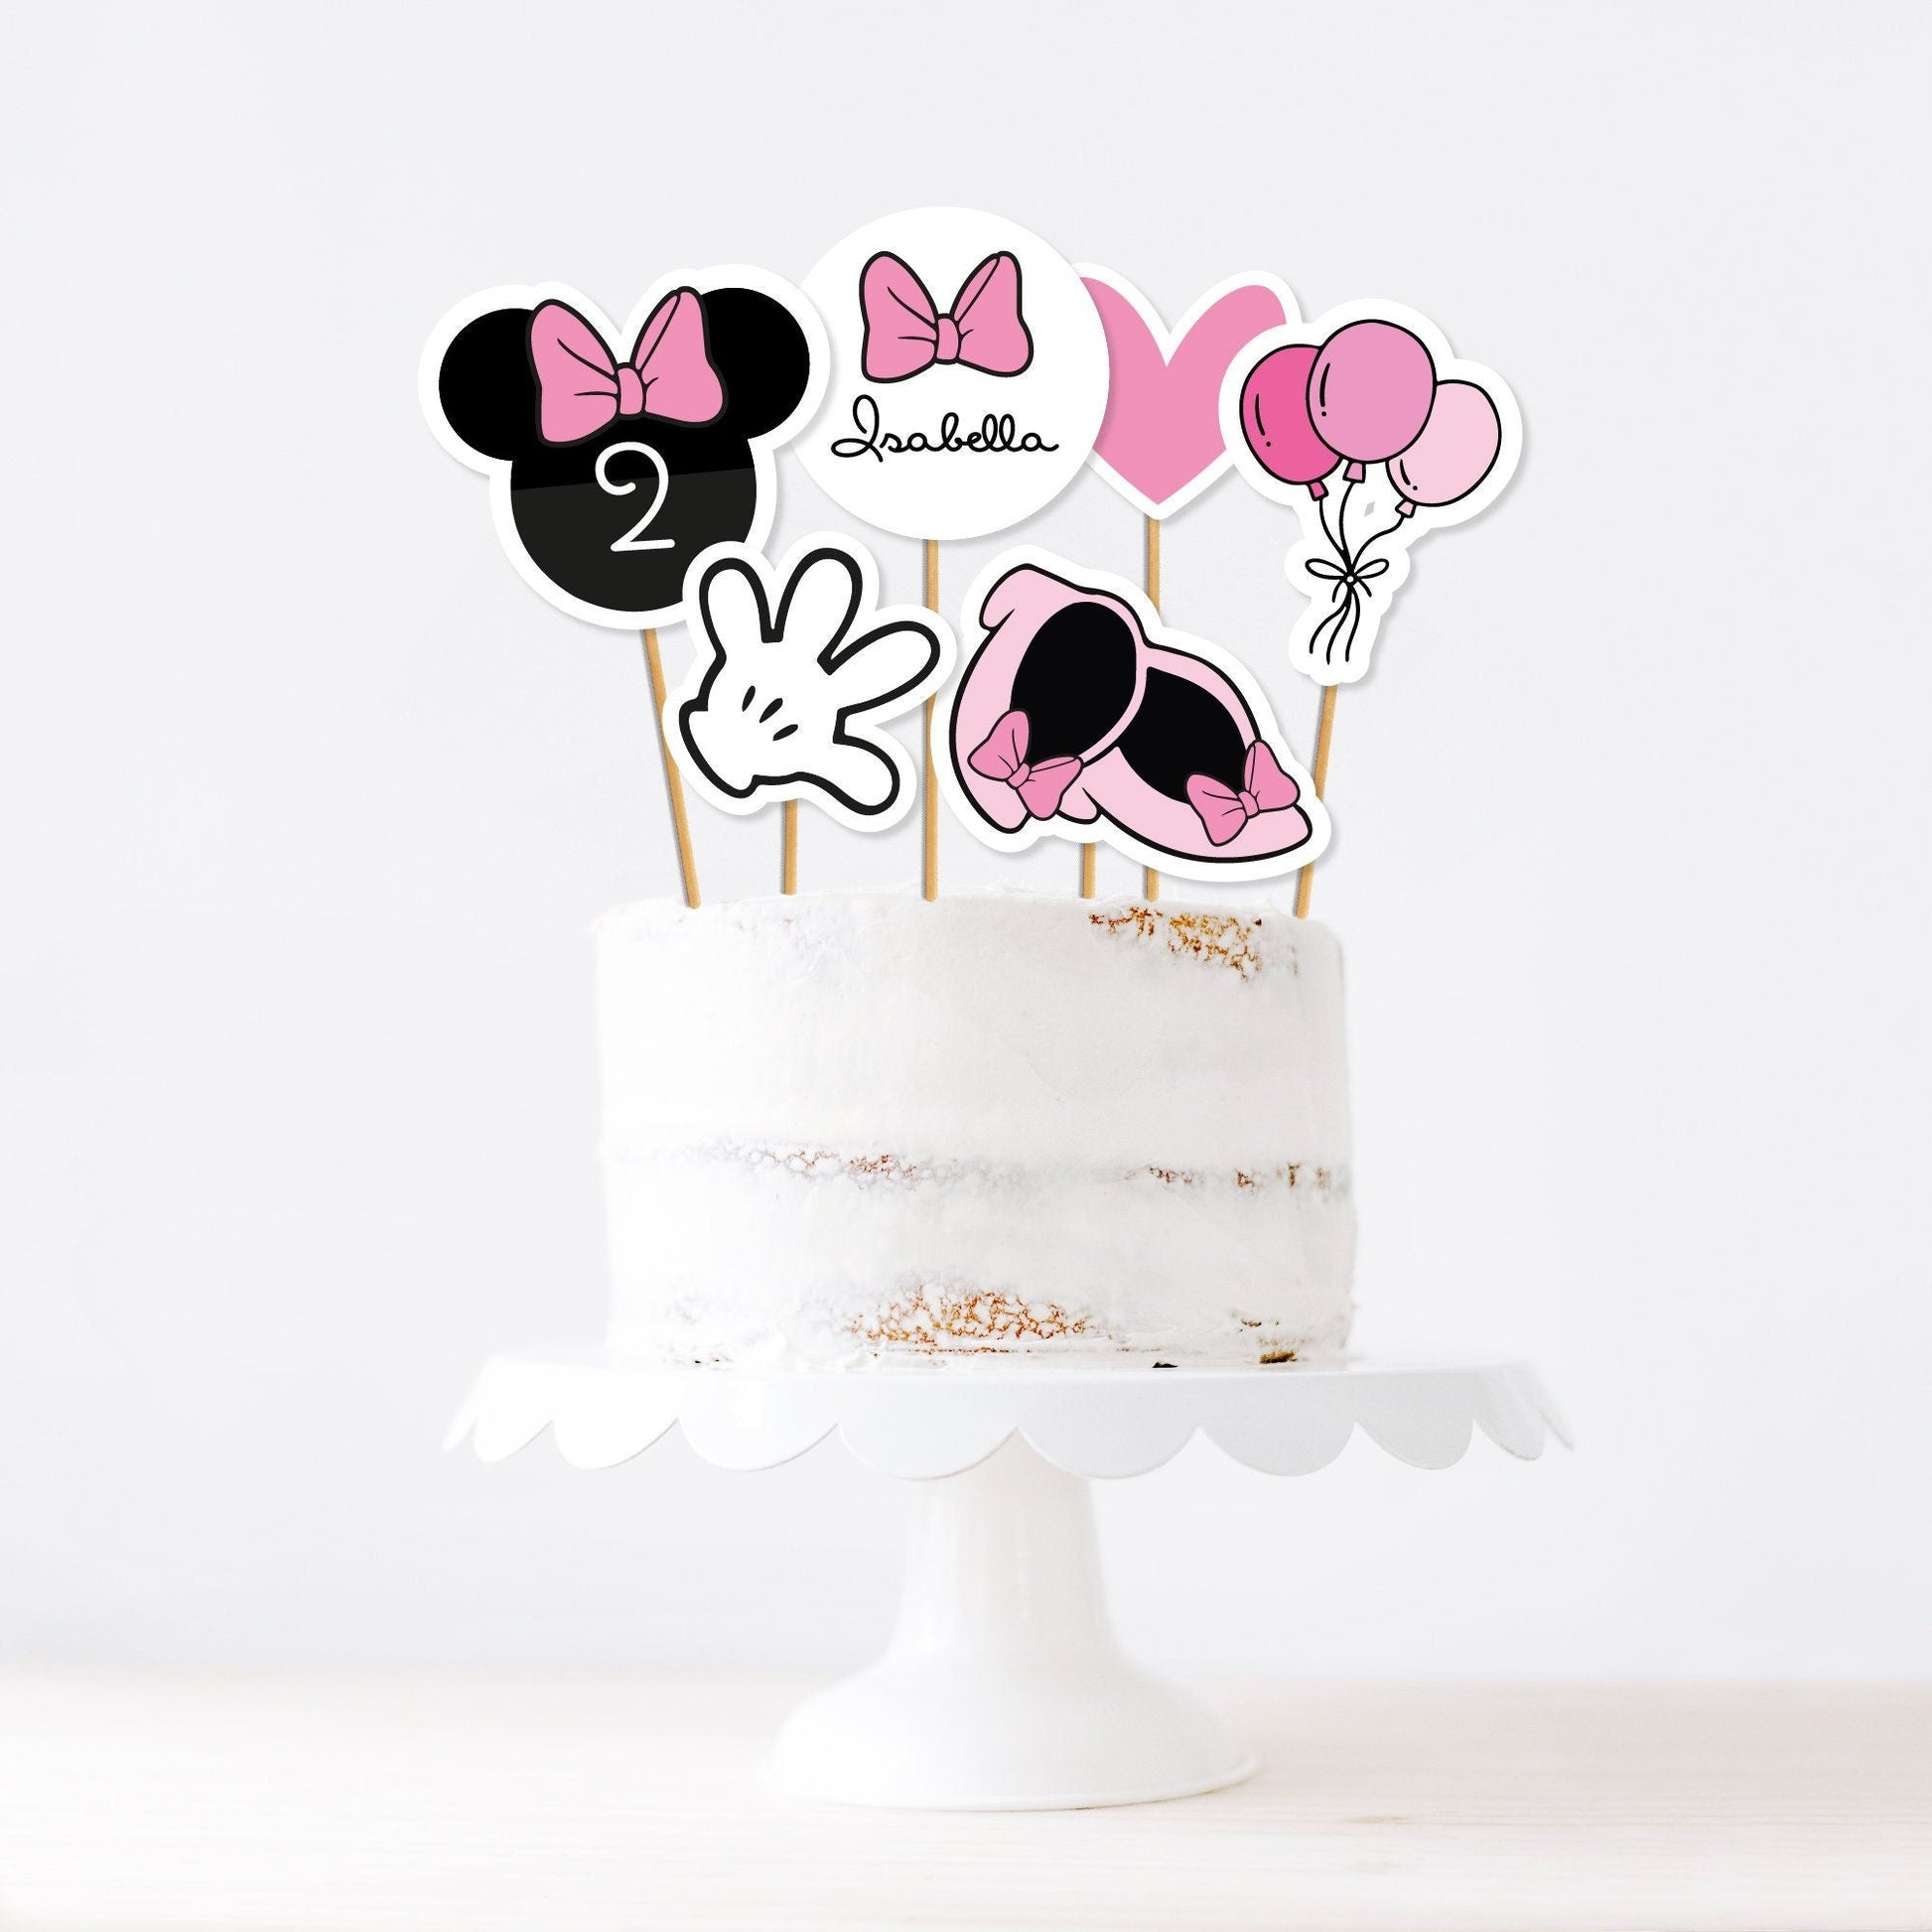 https://digitallyprintables.com/cdn/shop/files/minnie-mouse-cake-toppers-or-centerpieces-instant-download-or-editable-text-digitally-printables-1_7fee7ee8-11db-45f5-8cd7-0964144b070e.jpg?v=1687272434&width=1946